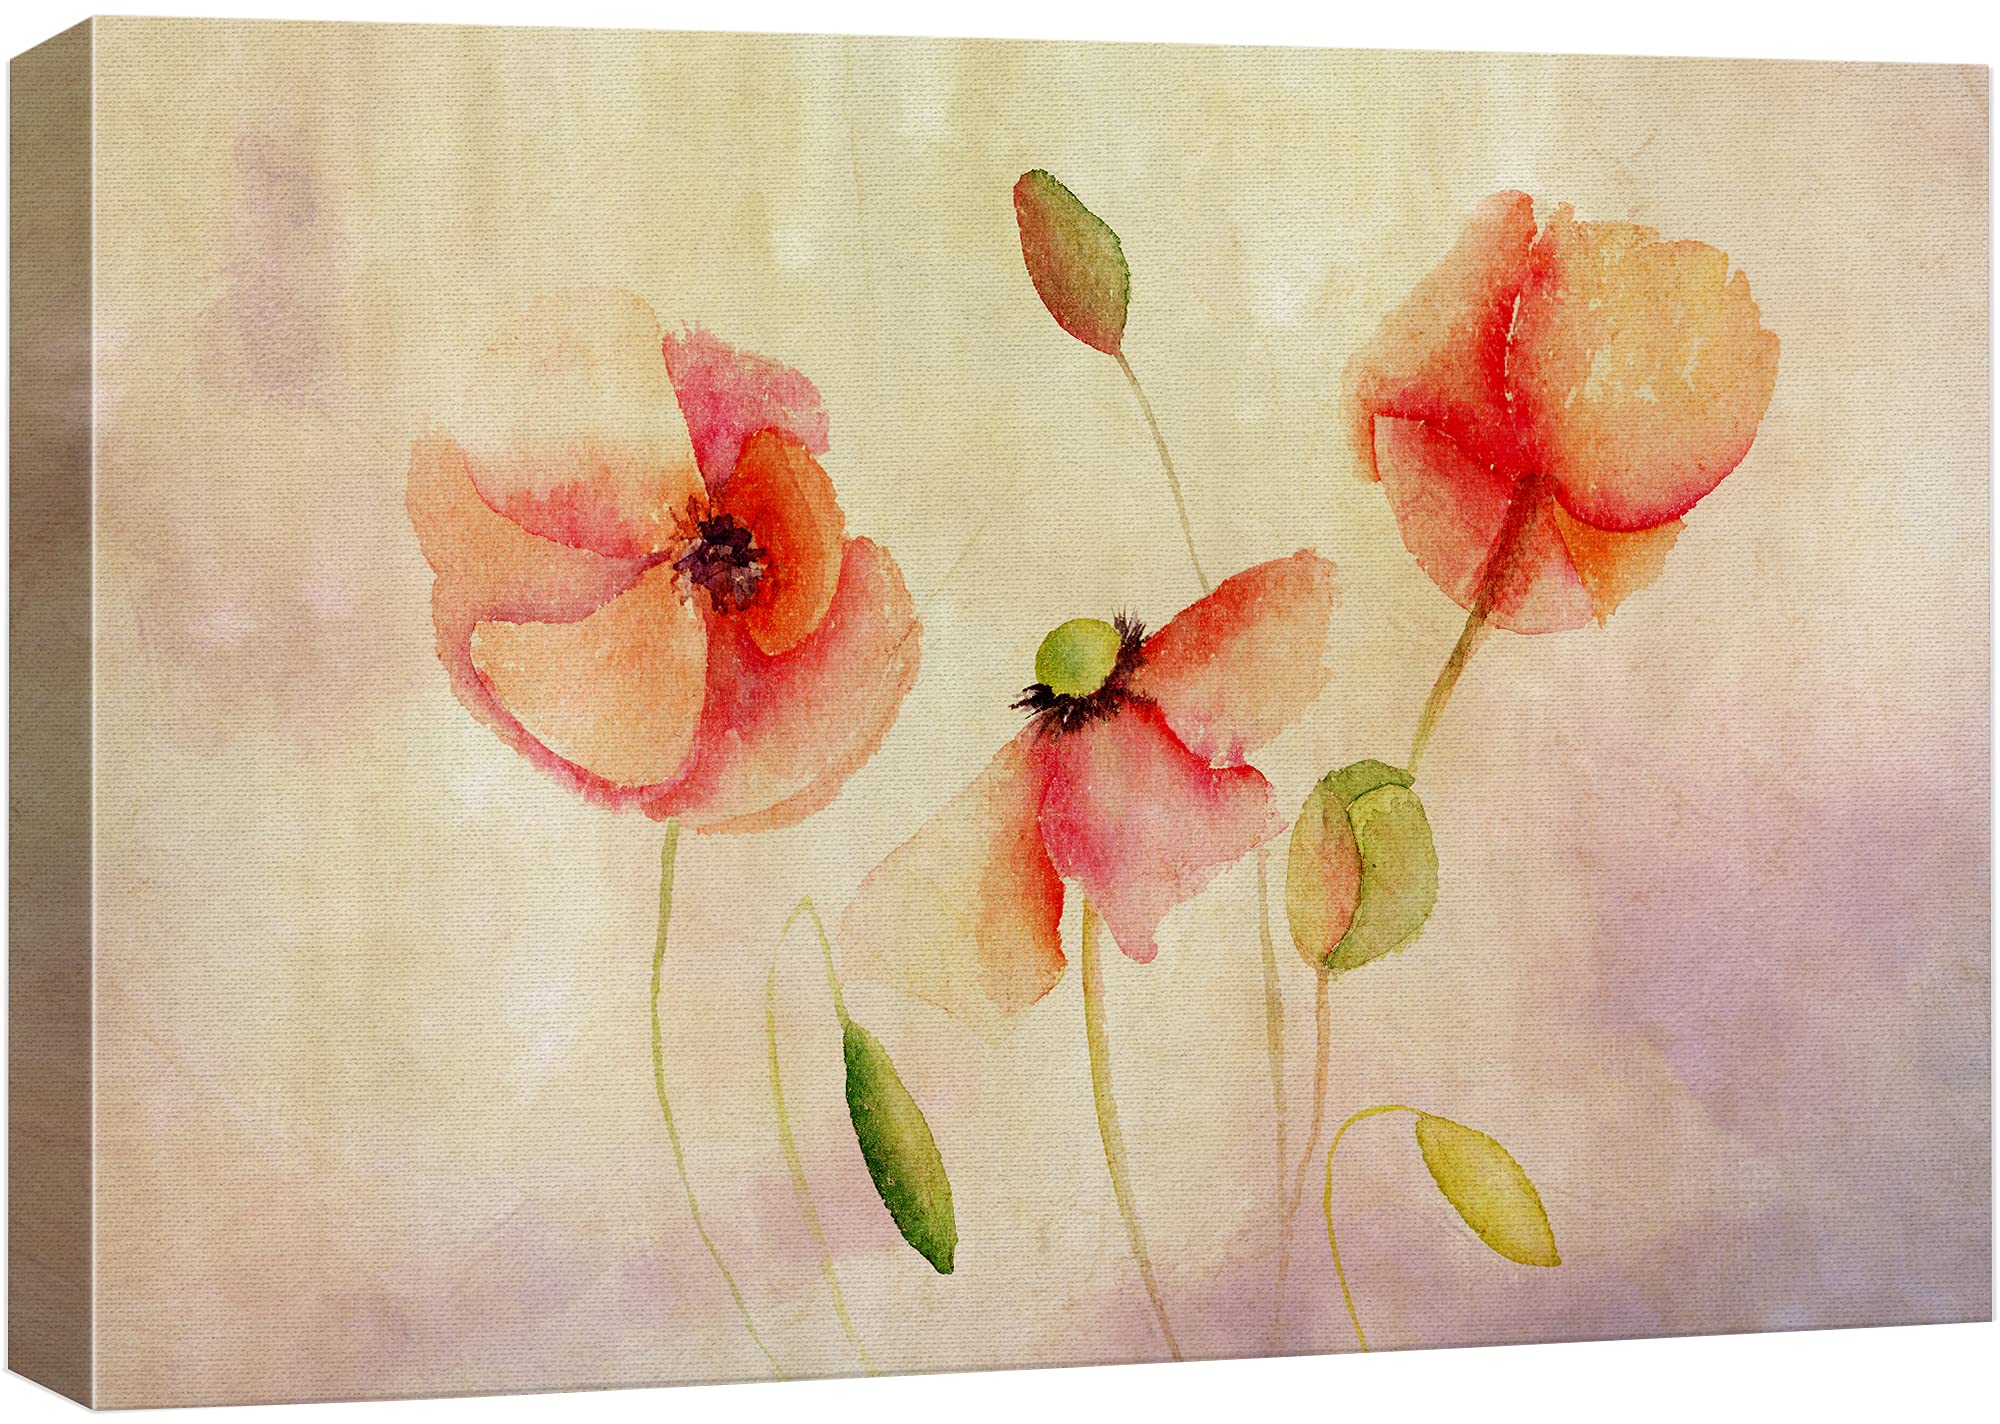 wall26 Canvas Print Wall Art Vintage Watercolor Orange Poppy Flowers Floral Botanical Illustrations Modern Art Rustic Scenic Colorful Multicolor fo...